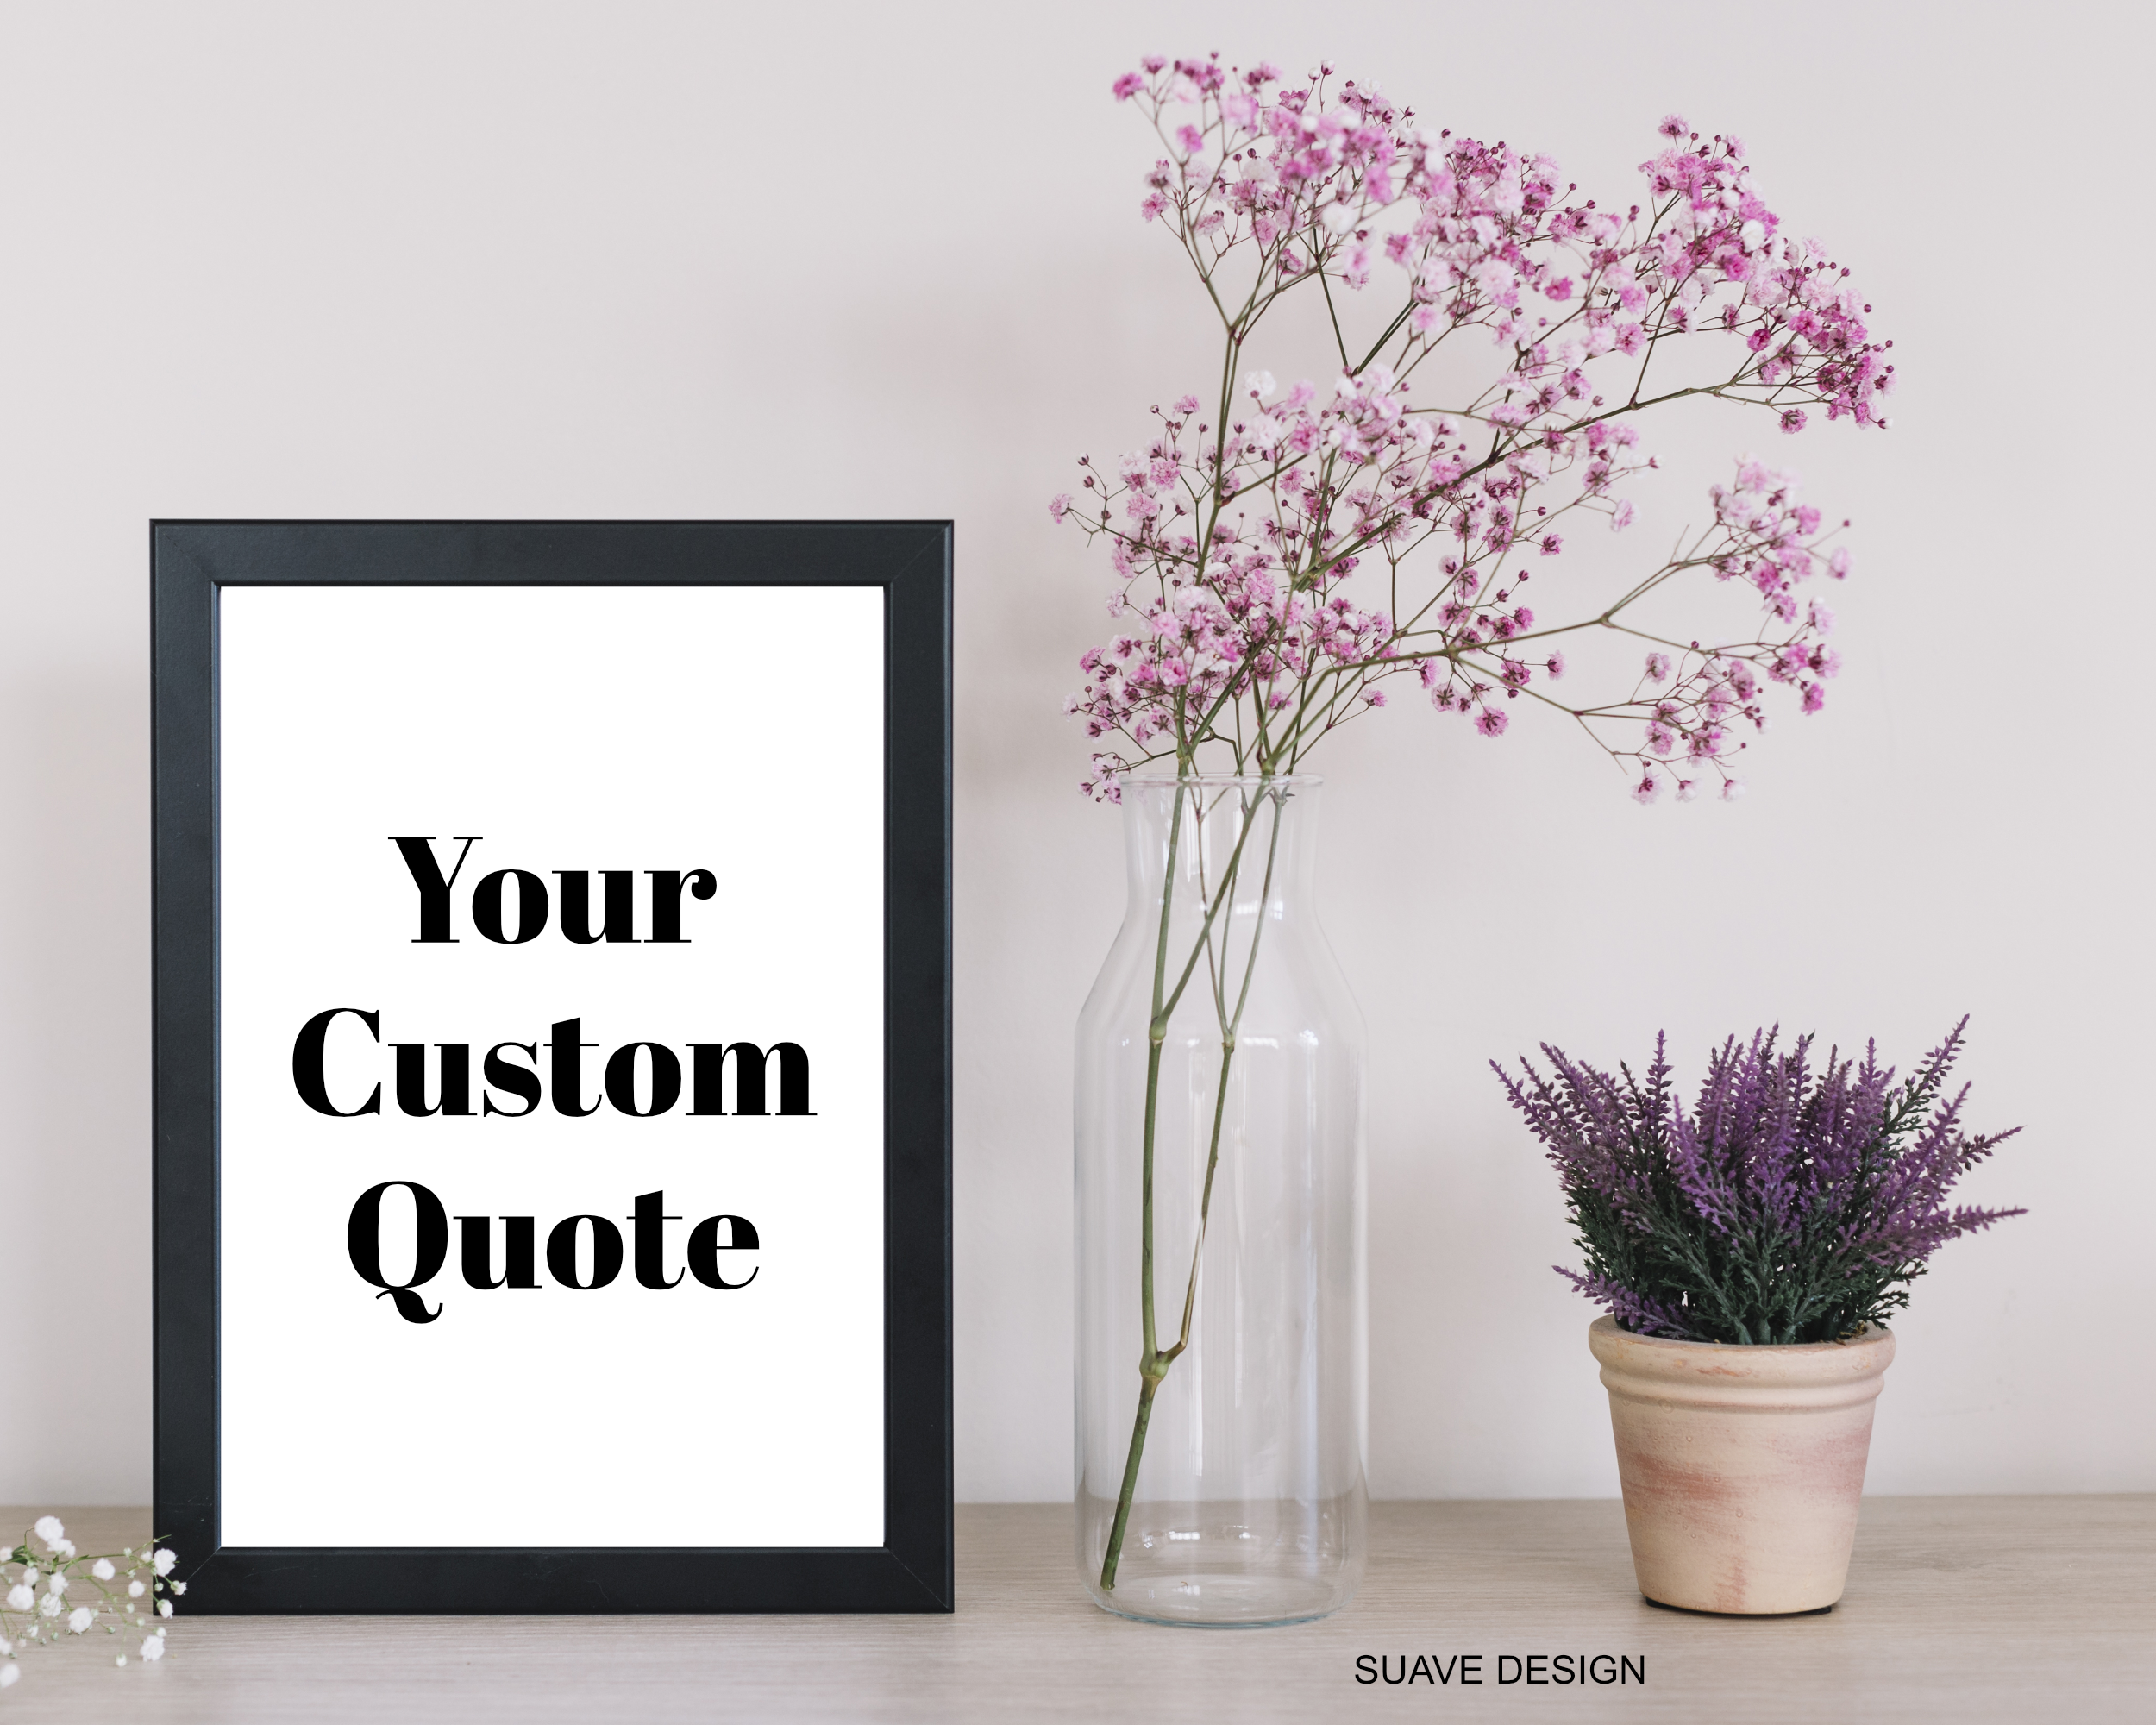 Your Own Custom Quote!
Struggling to find the right print for your home? This listing allows you to create your own 100% custom text print.